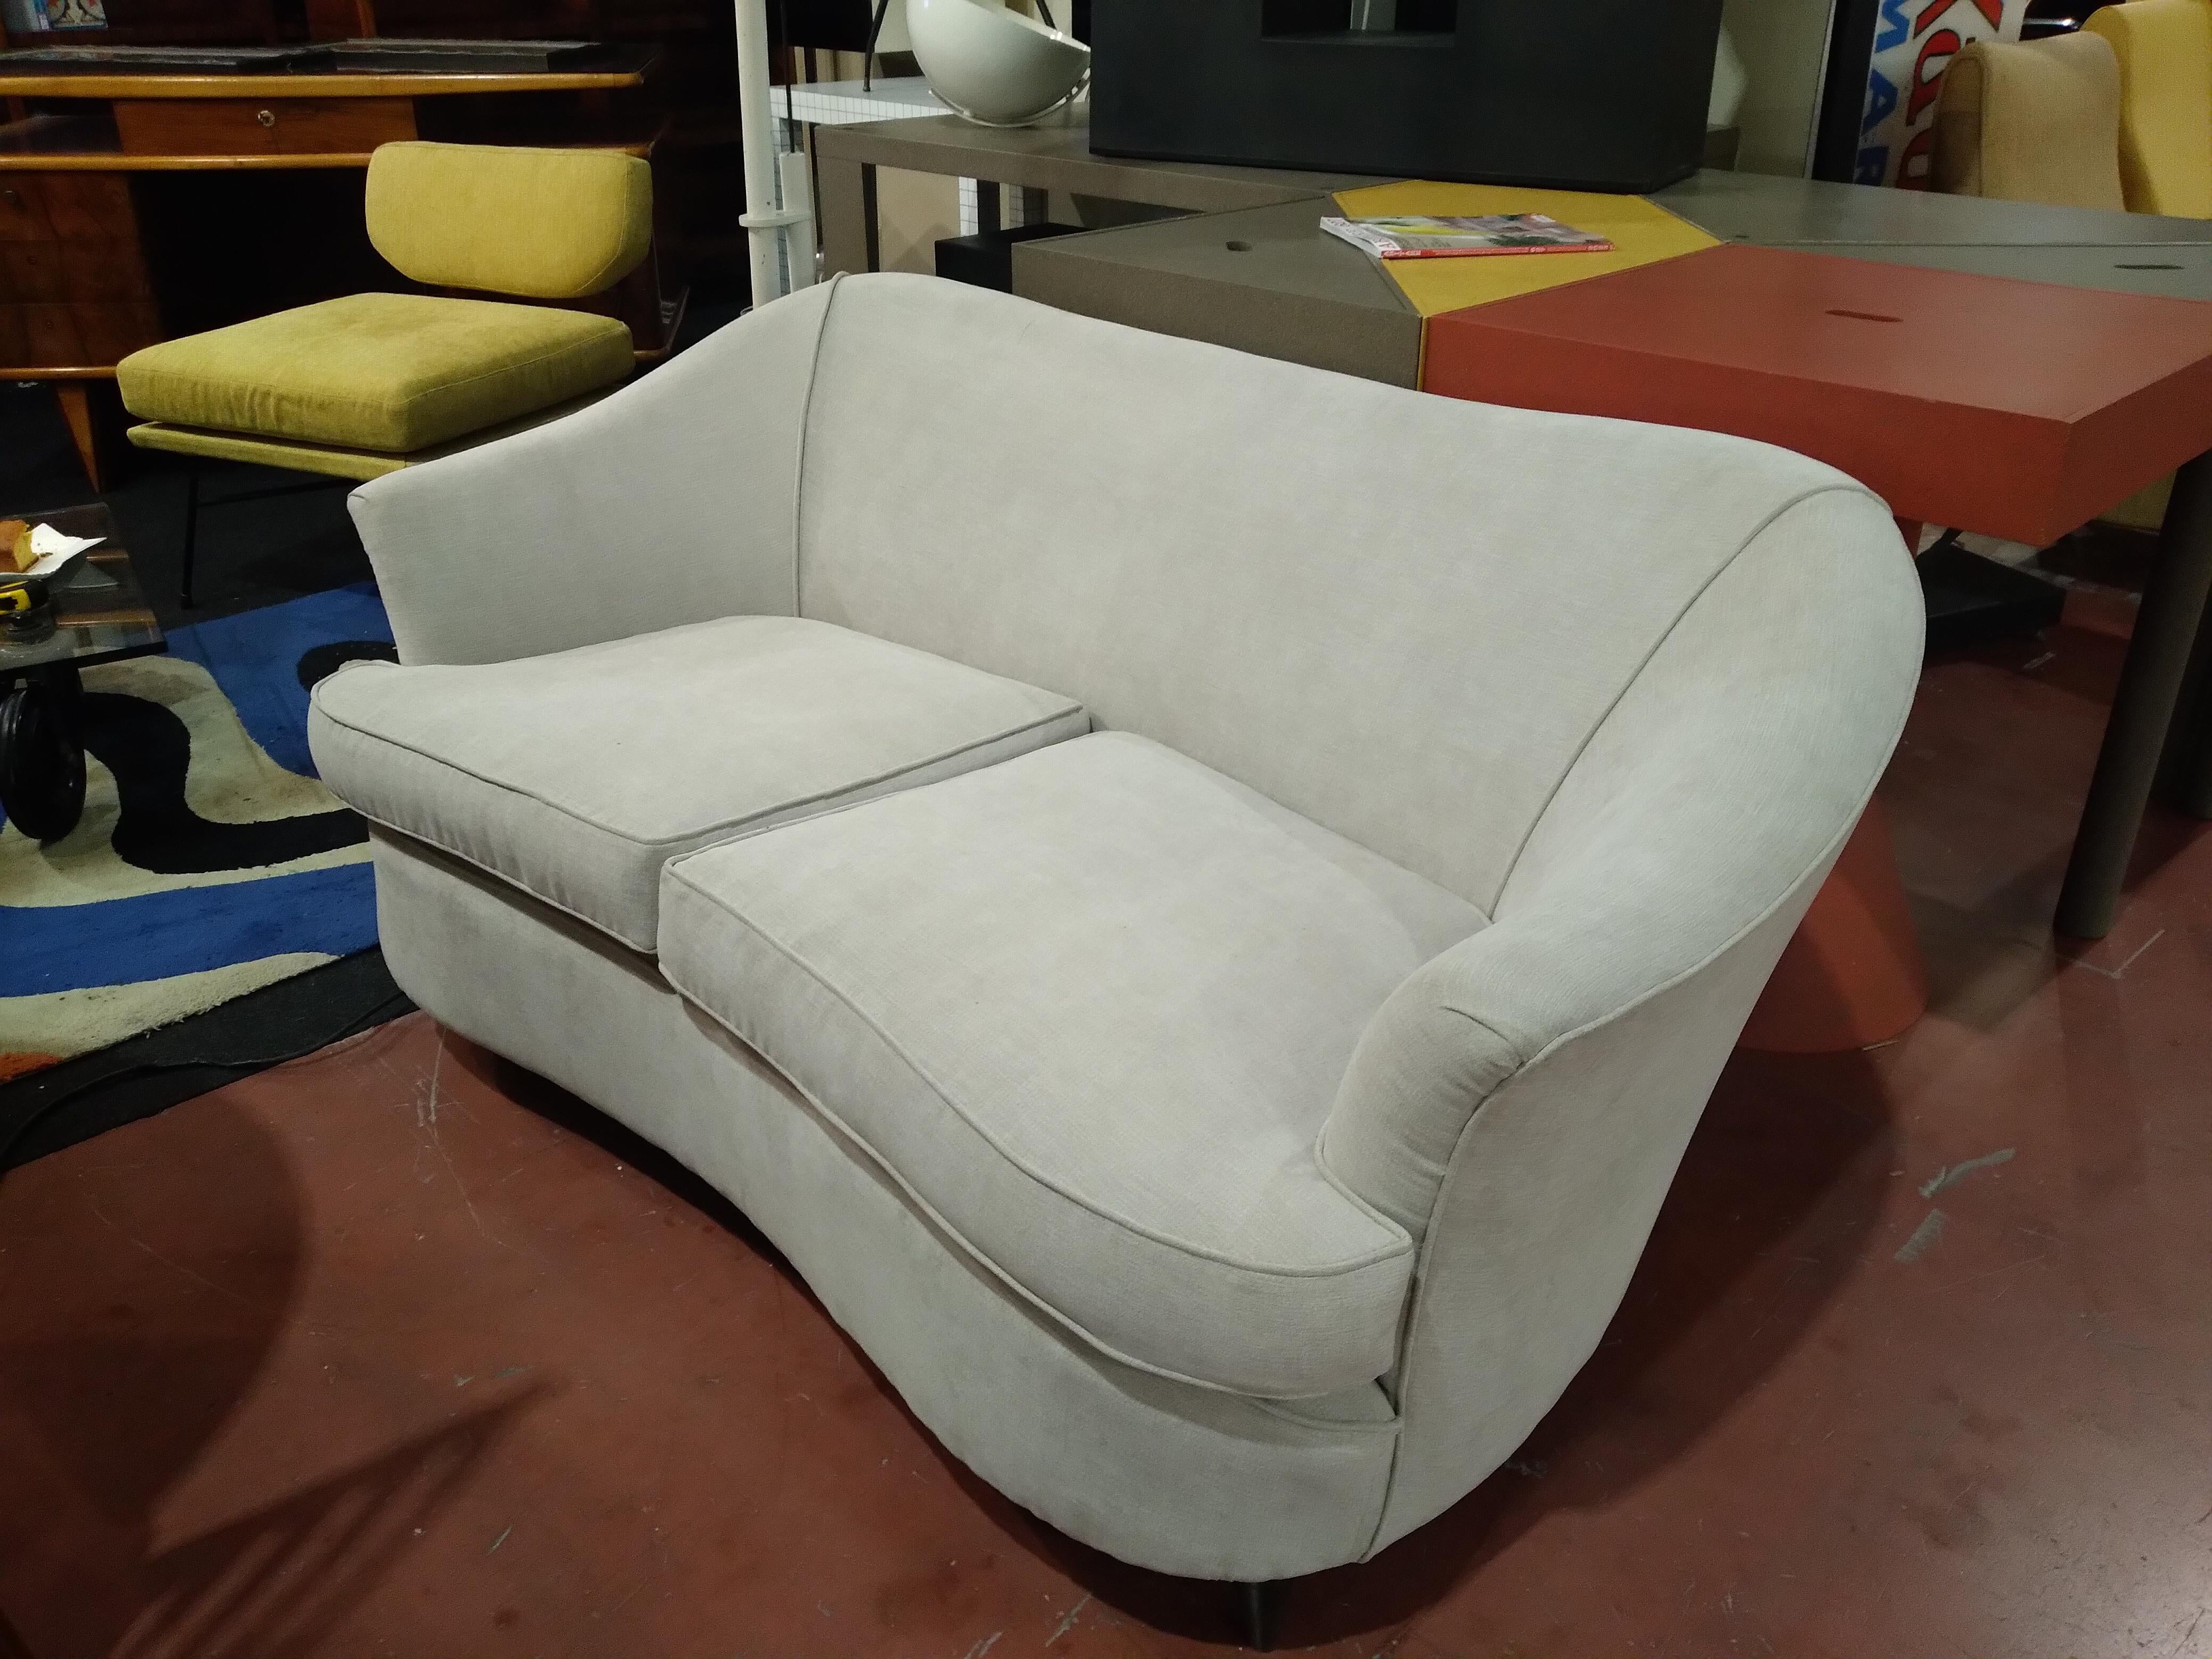 Sofa by Gio Ponti for Home and Garden 1950 .This sofa is a two-seater , it is a sofa with soft and enveloping lines , with its   rounded line is a design icon of the 1950s .It sets with great lacility in any environment , has been arranged in the